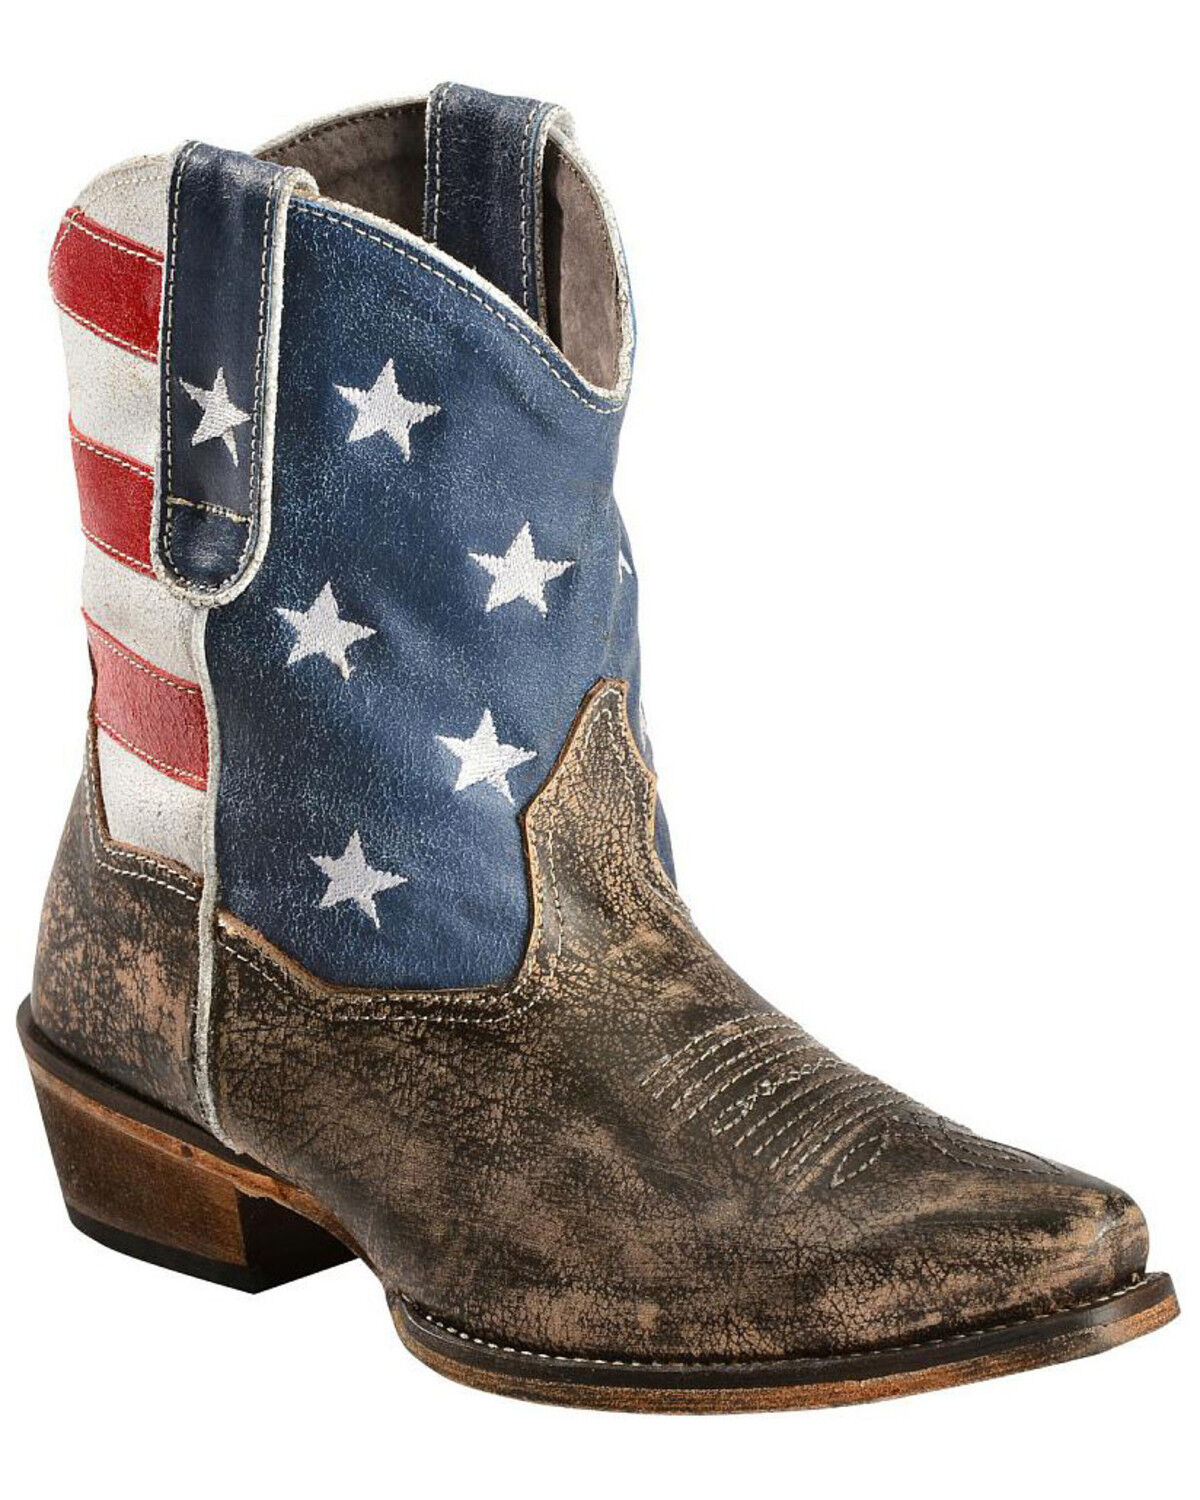 New York boots Usa patriotic Women's Canvas Boots,Custom patriot boot,woman usa flag,custom shoes punk  pride shoes,liberty statue boots